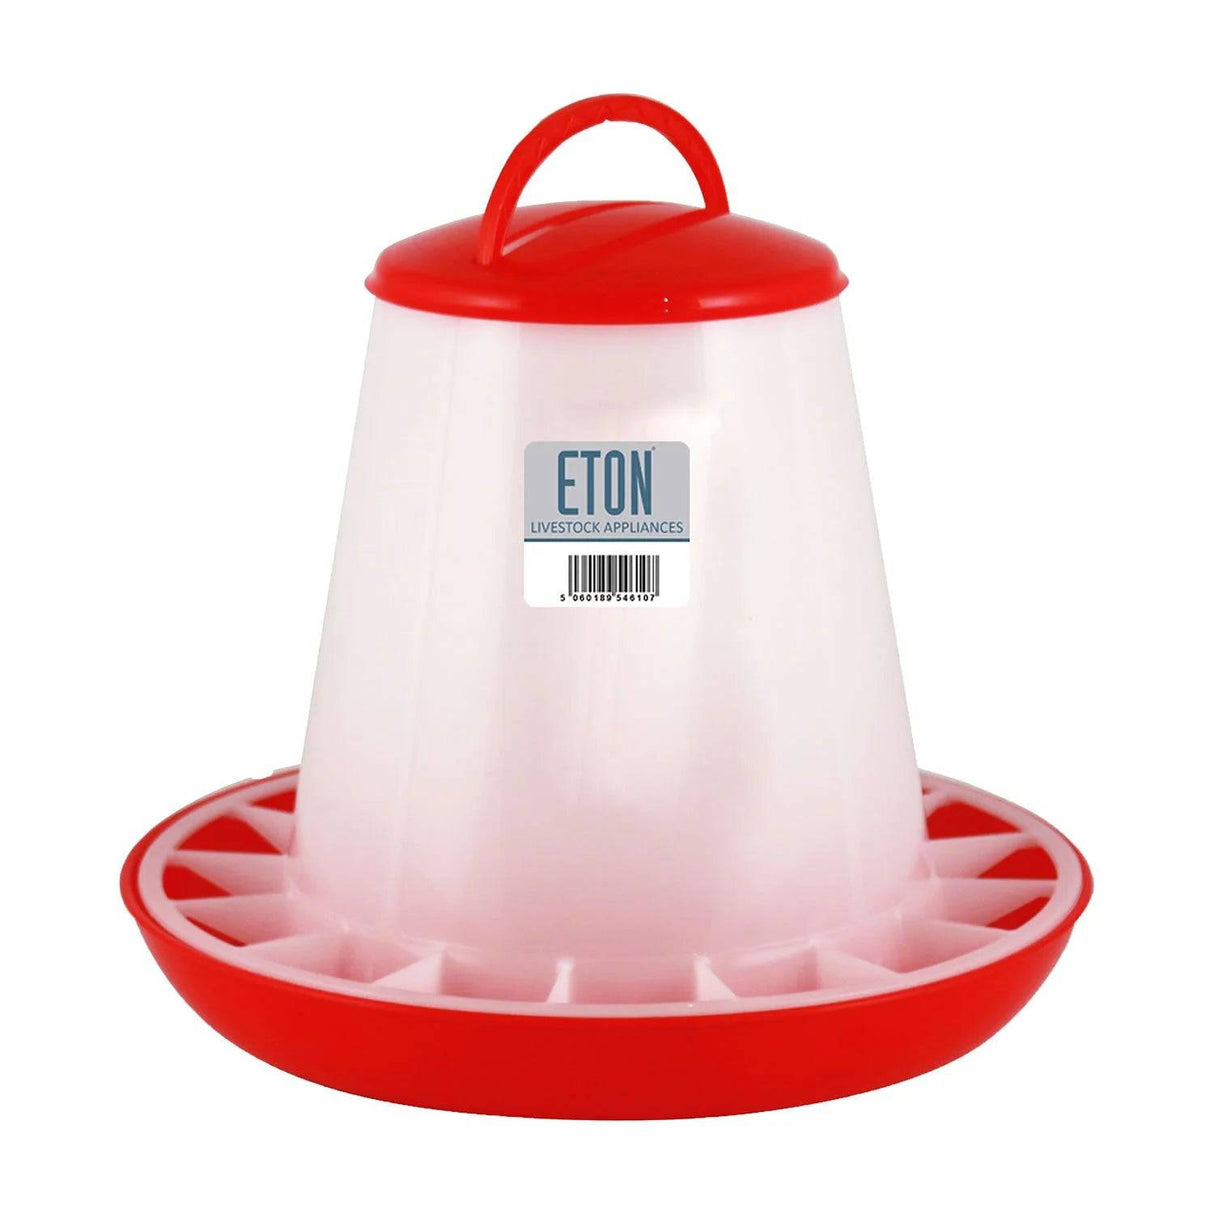 Eton TSF Poultry Feeder Red Poultry 1 Kg Barnstaple Equestrian Supplies